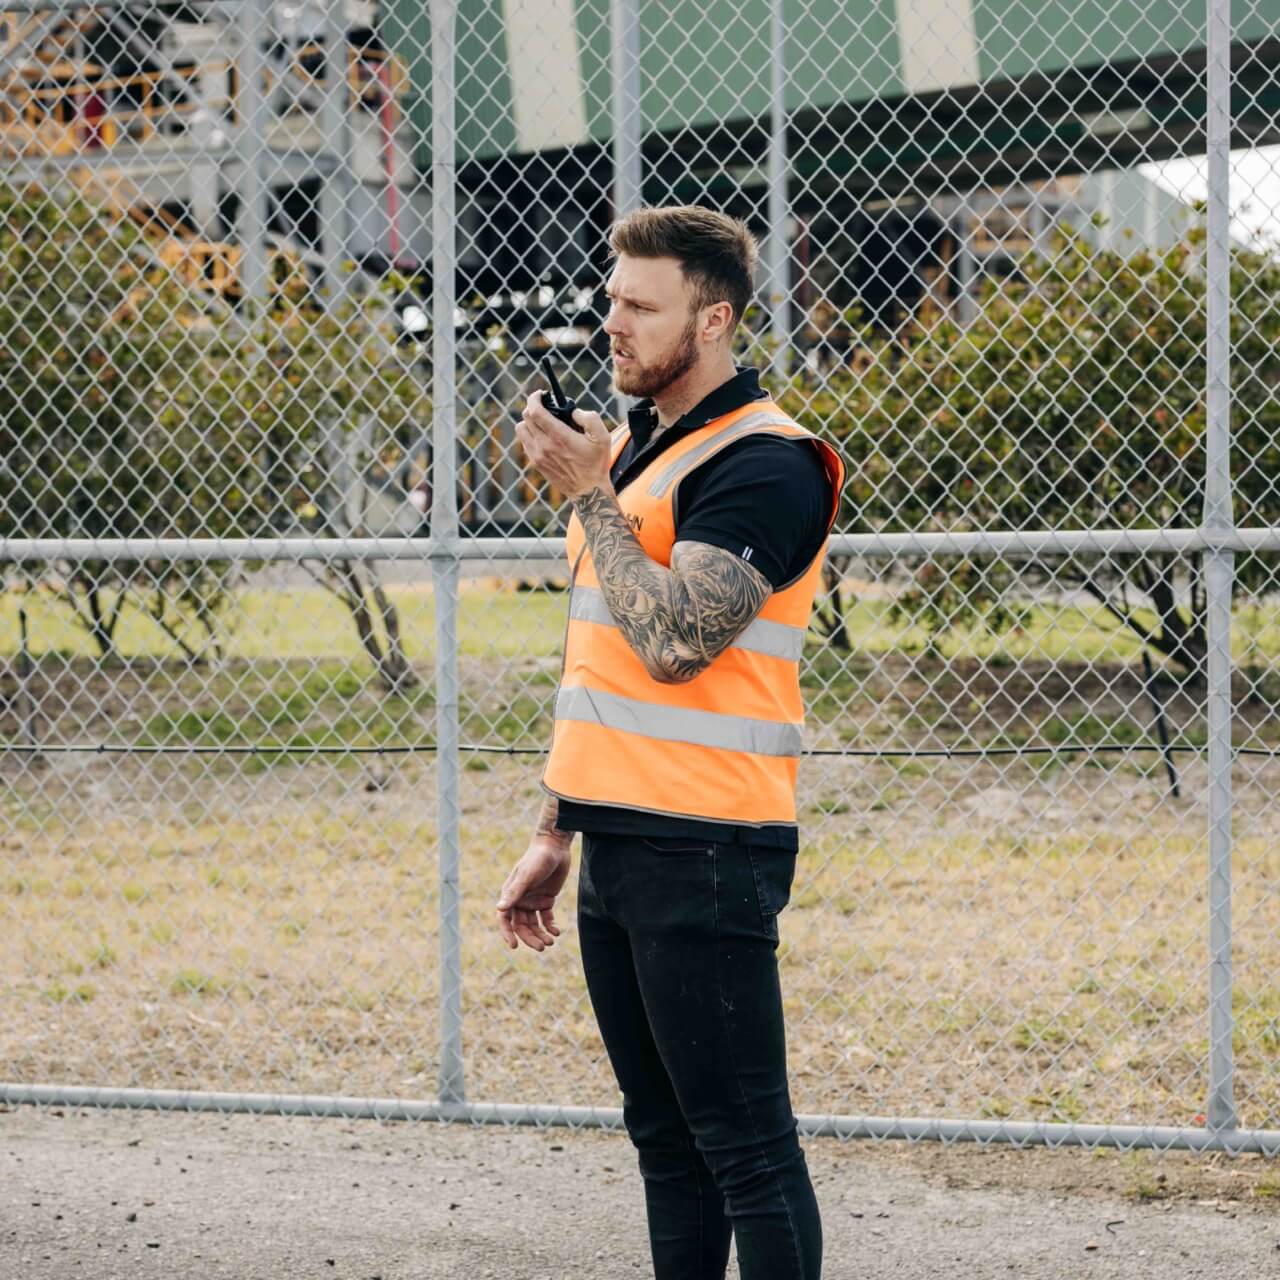 NHN employee speaking on a handheld radio outside a facility